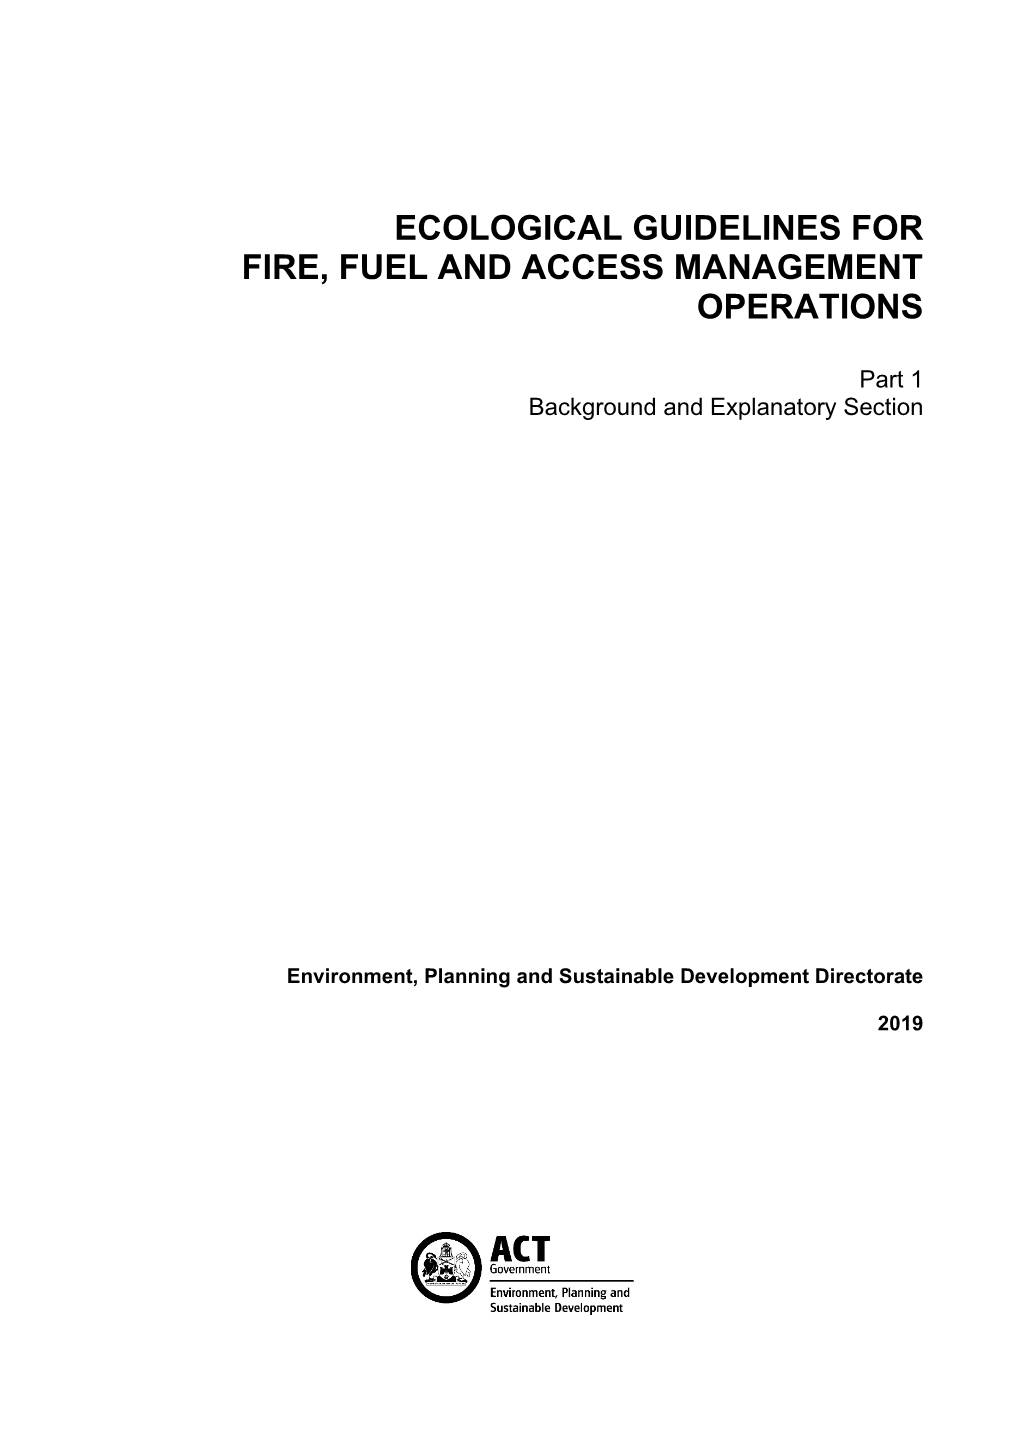 Ecological Guidelines for Fire, Fuel and Access Management Operations